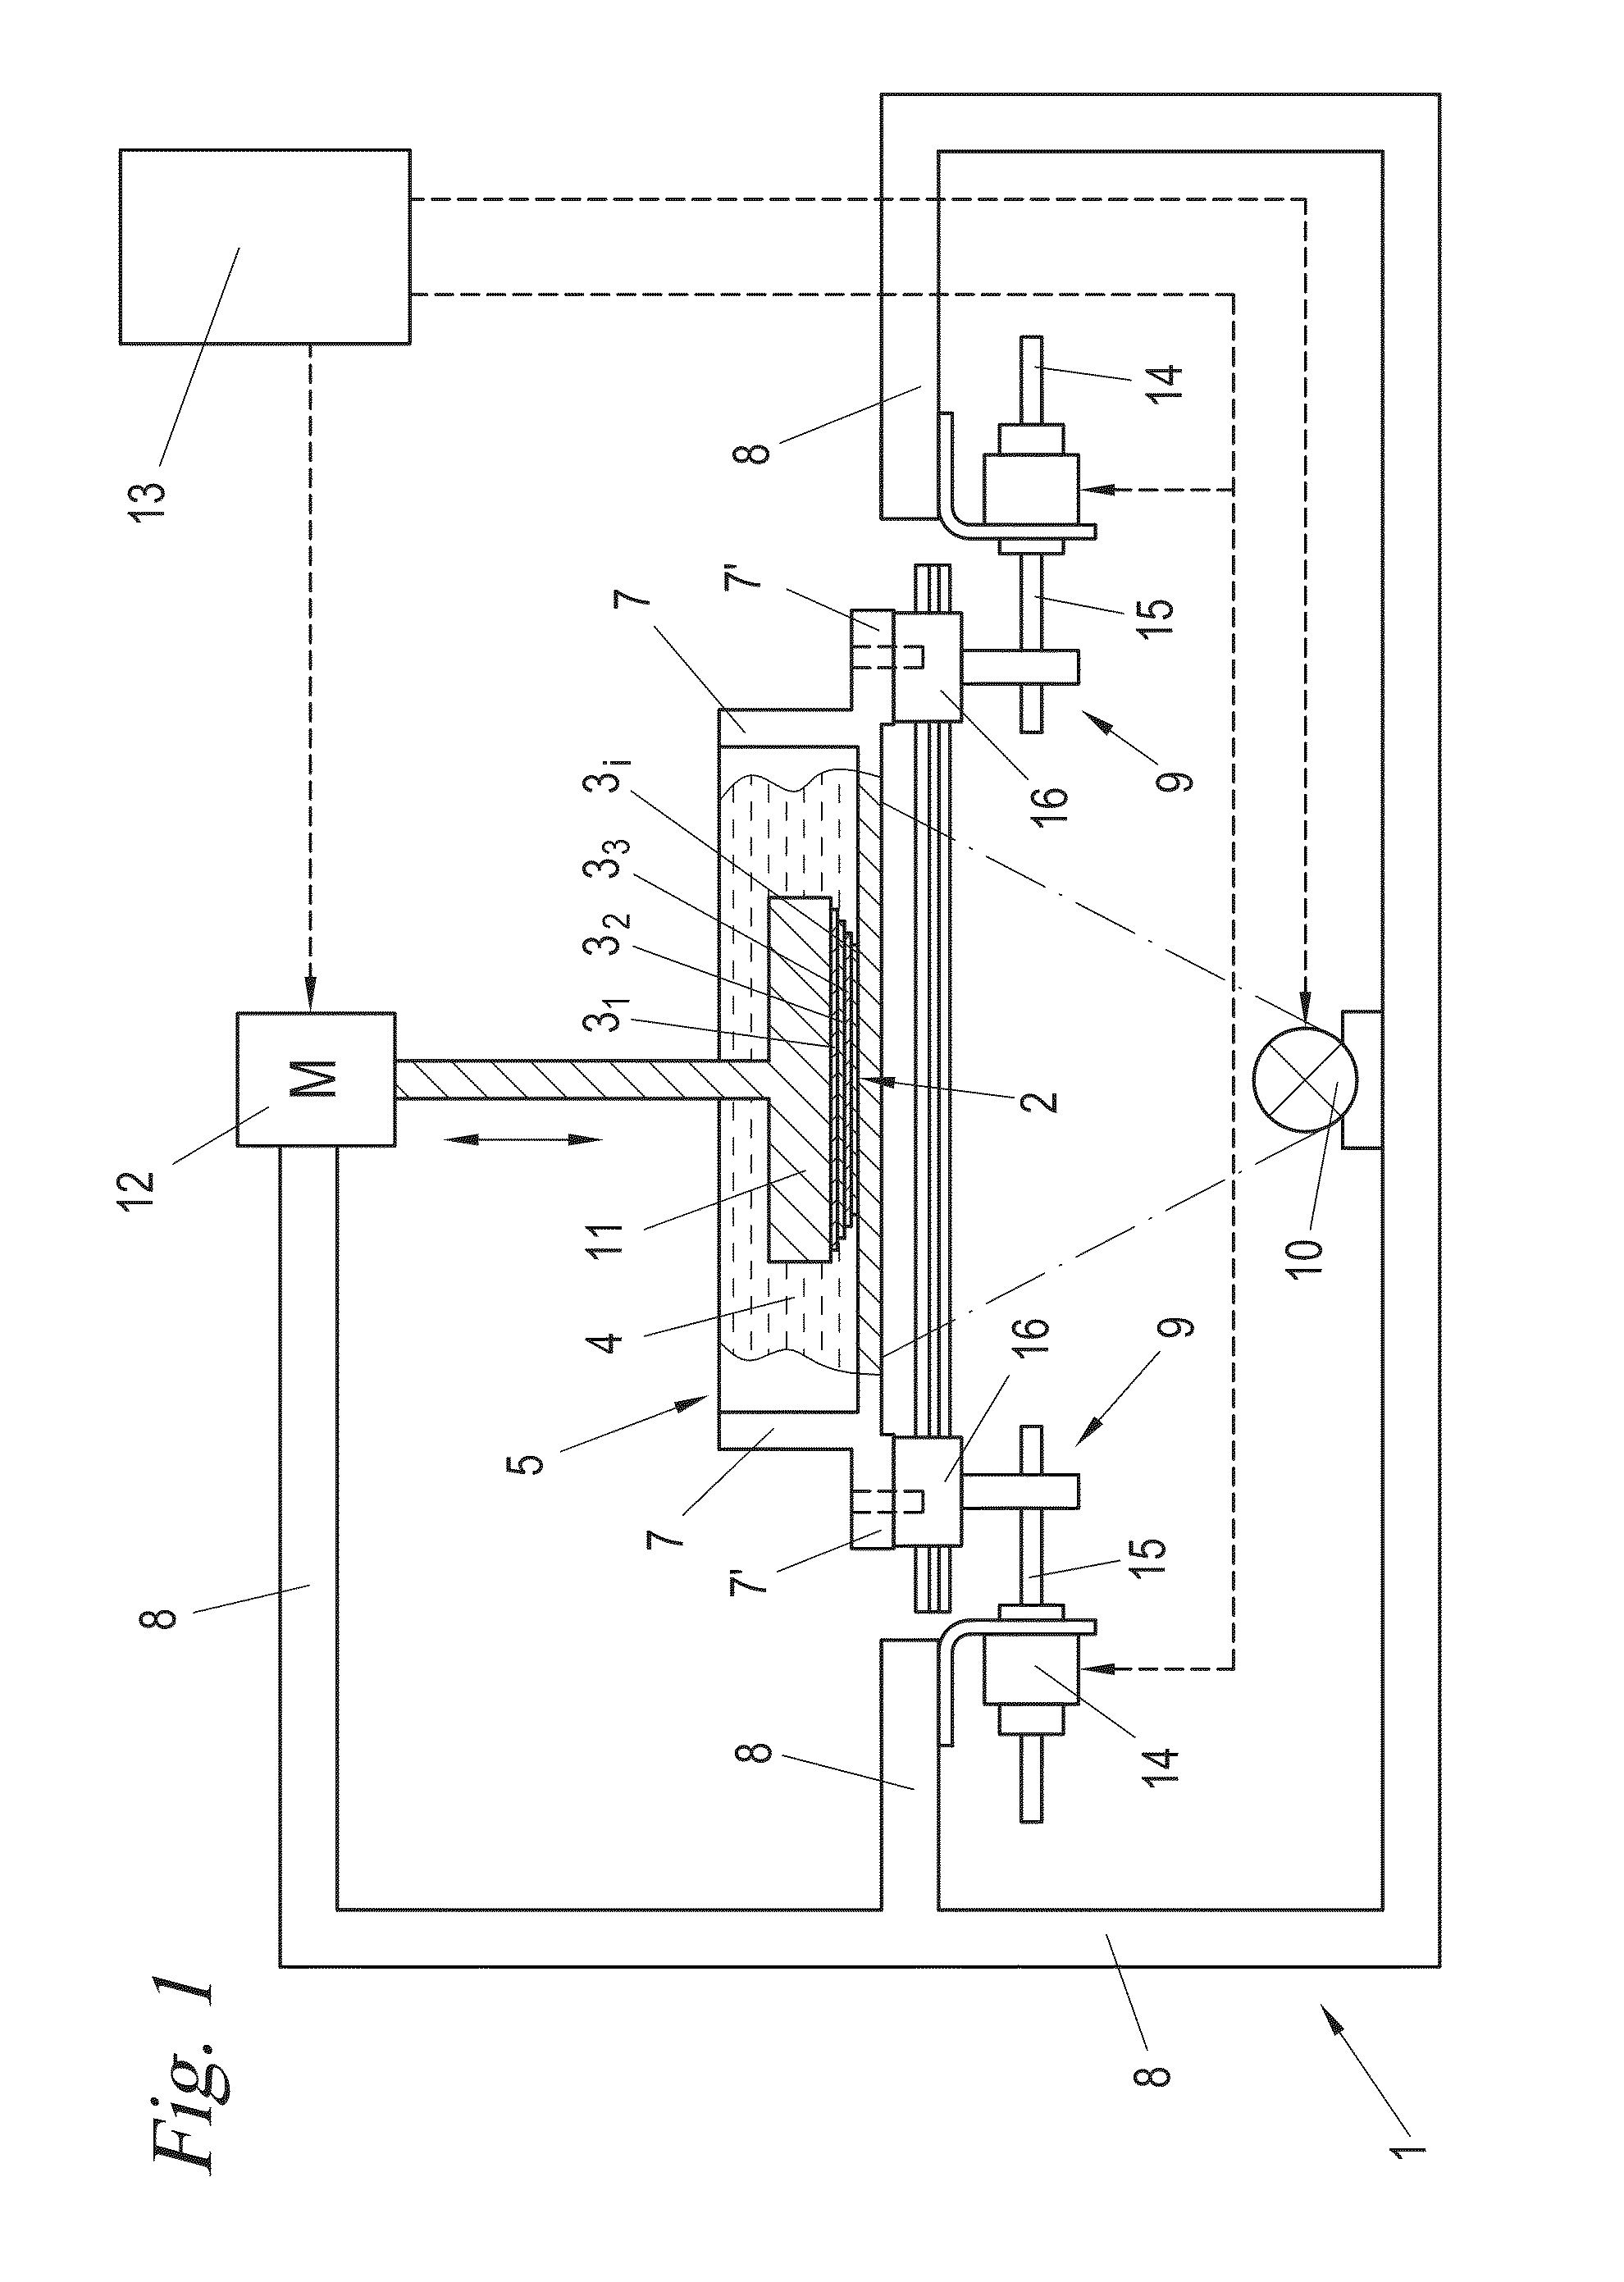 System for layered construction of a body and pan therefor